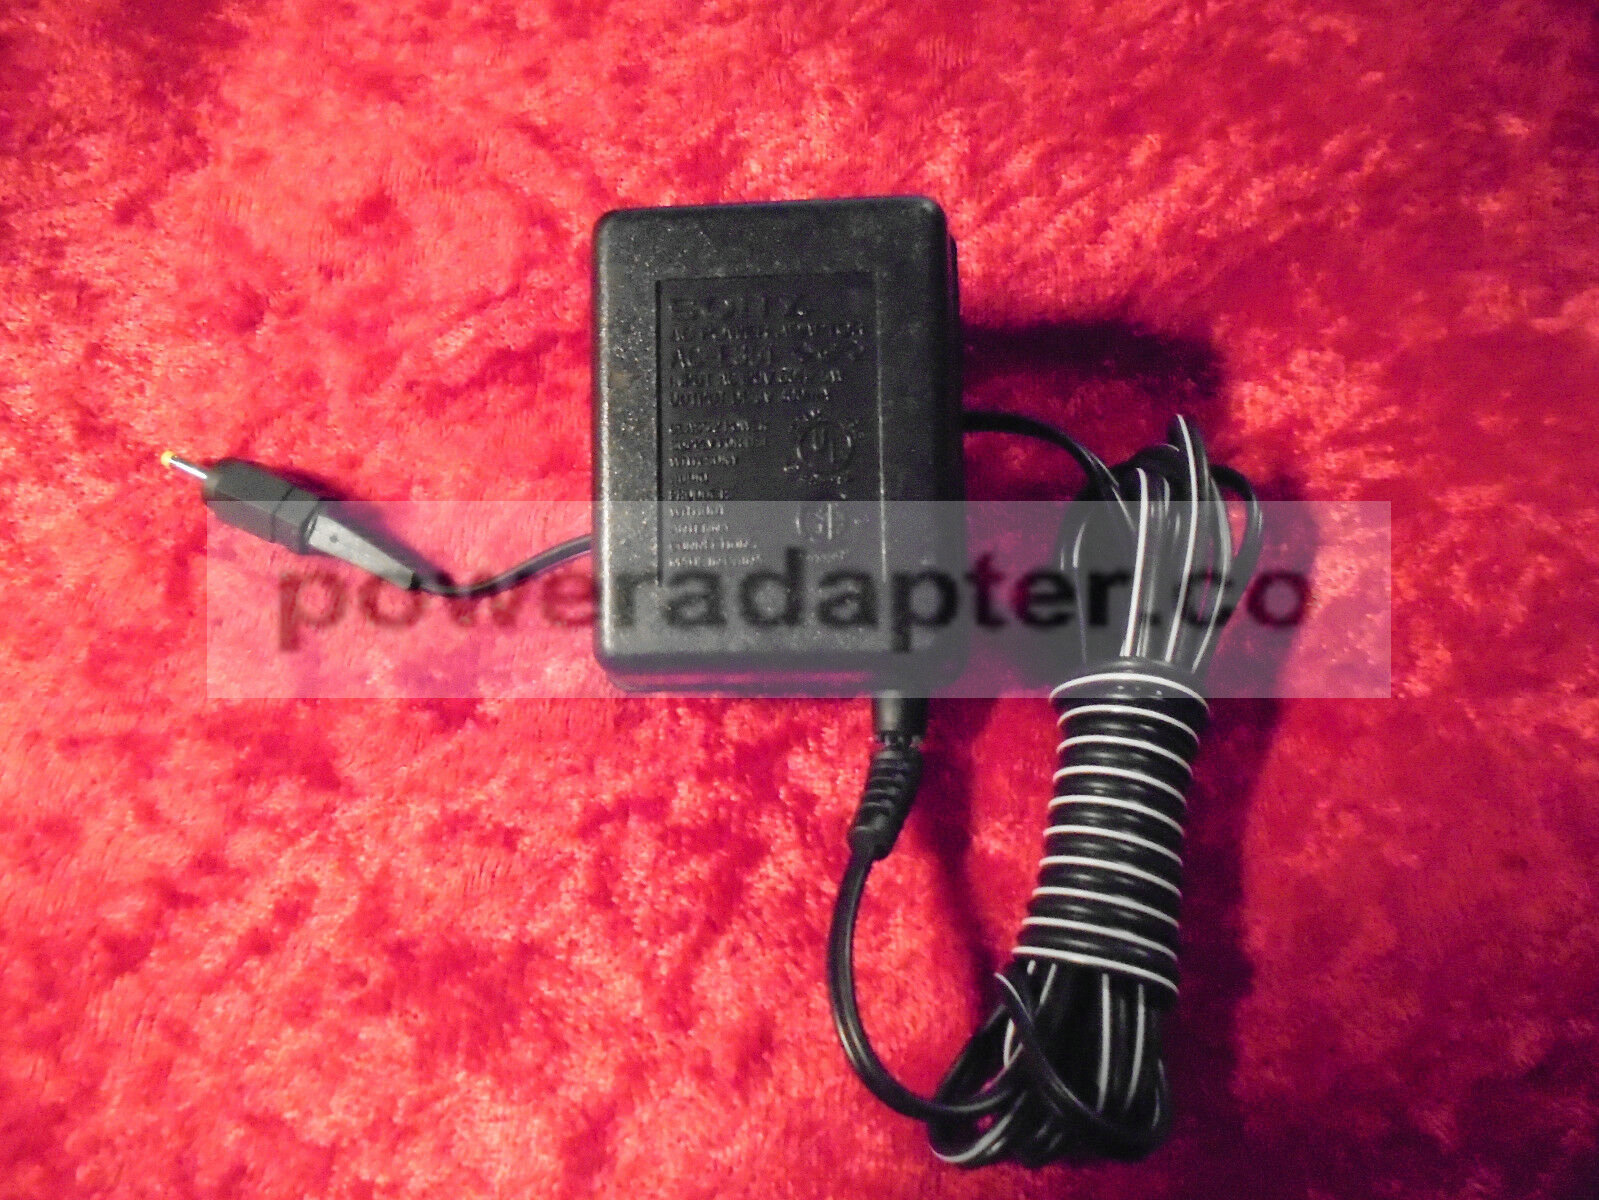 Sony AC-E351 3V Power Adapter ACE351 3 Volt for Minidisc CD MP3 MD and More Condition: new Brand: Sony Country/Regi